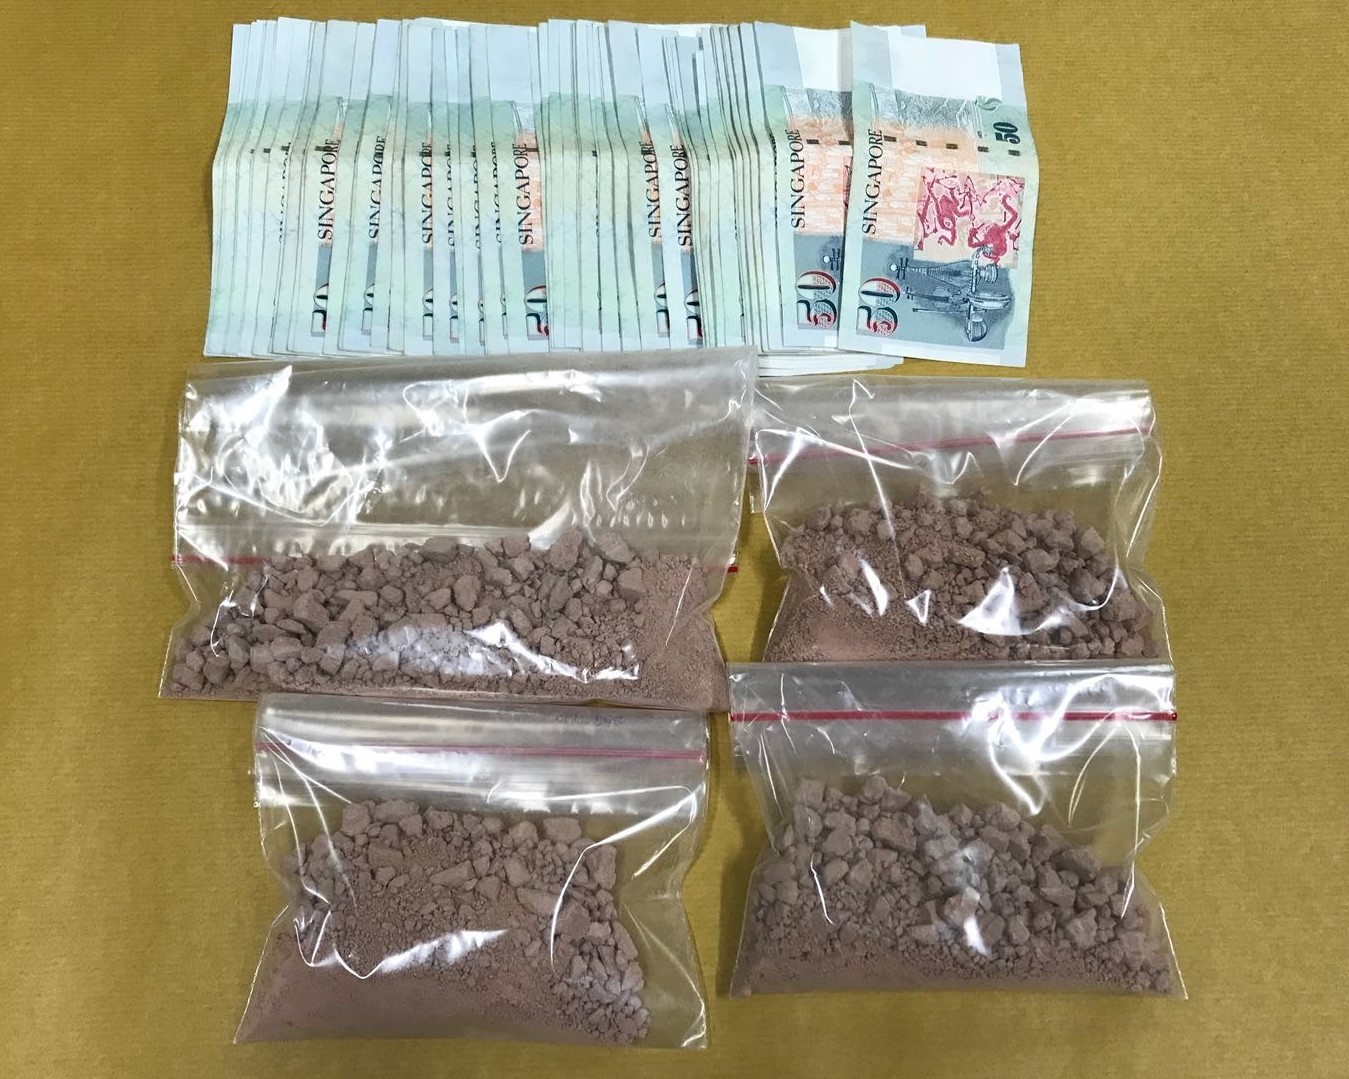 Heroin and cash seized on 15 Aug 2018